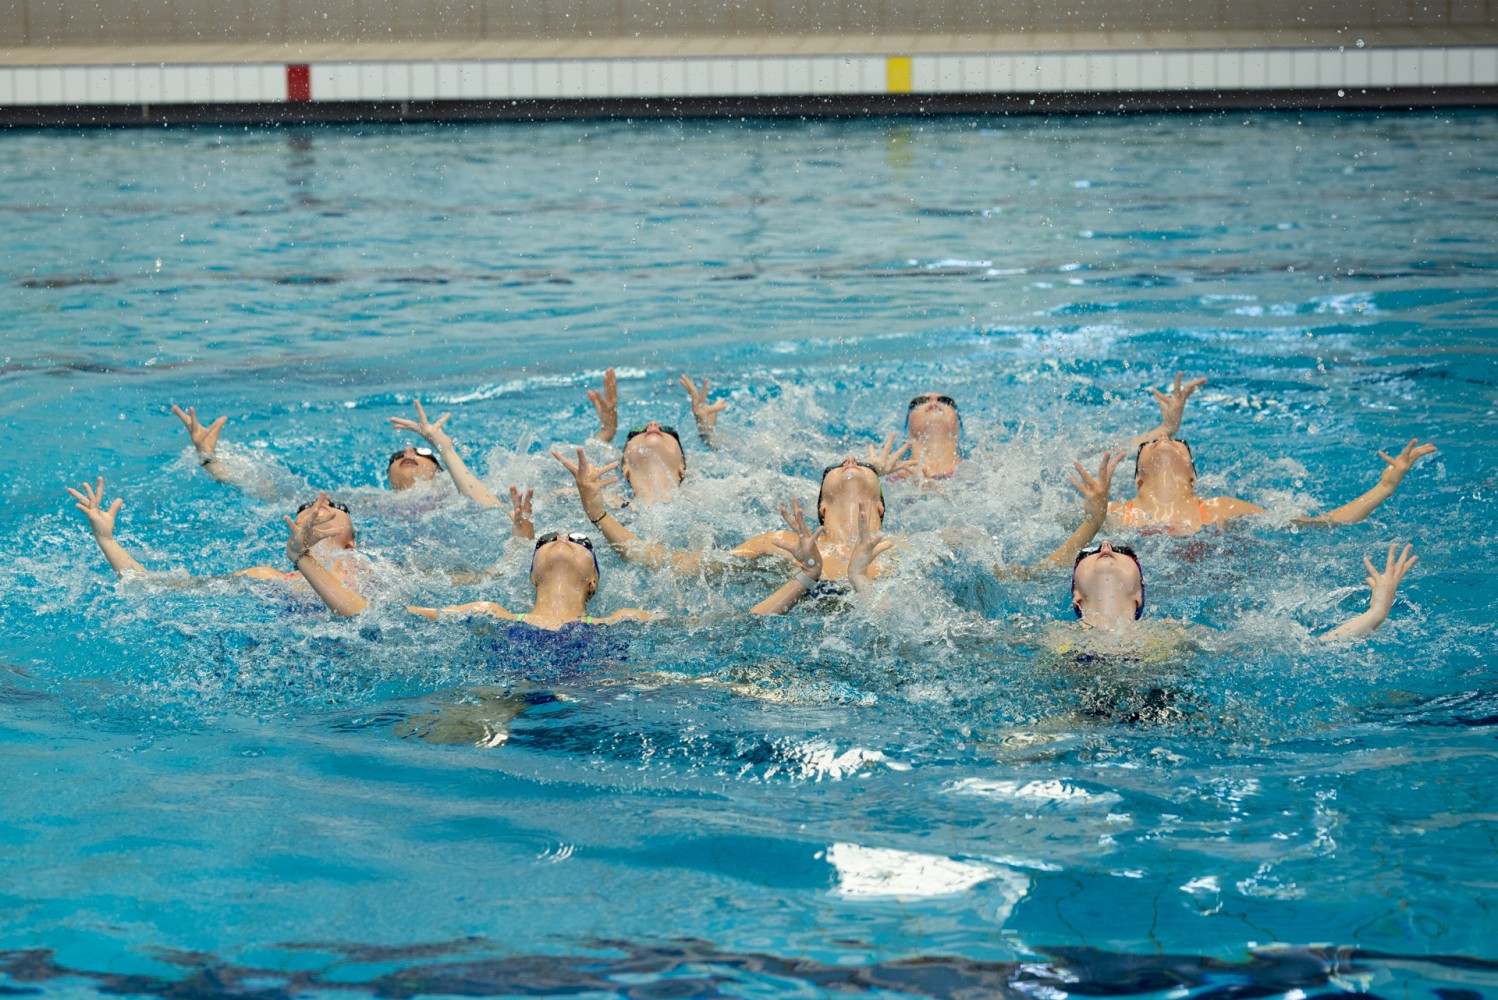 A group of artistic swimmers in a pose above the water 